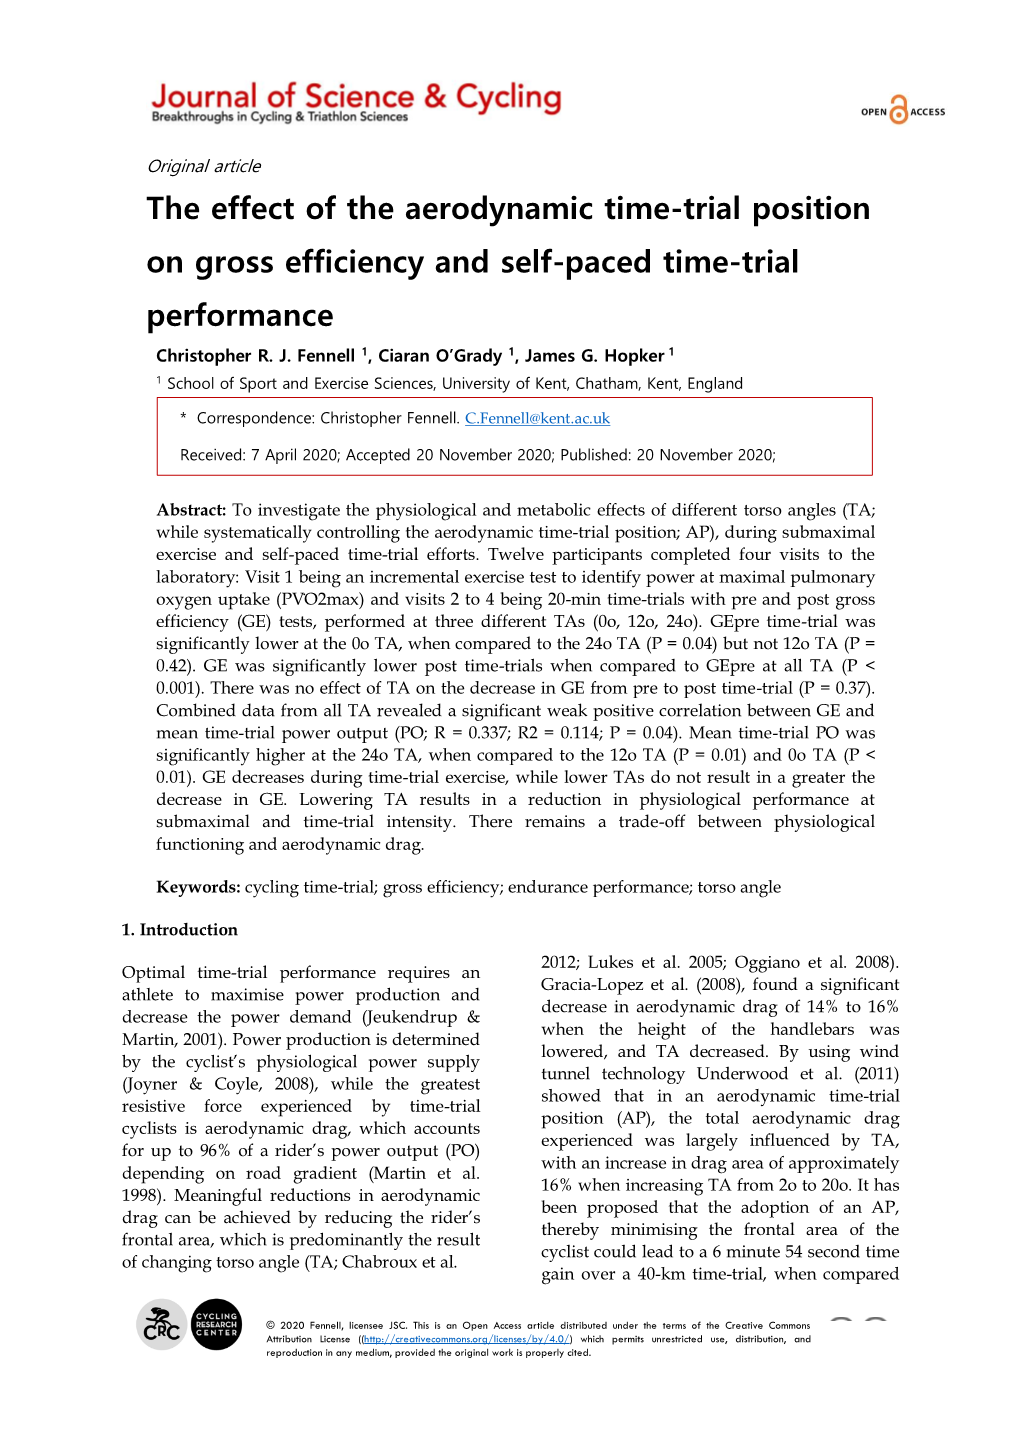 The Effect of the Aerodynamic Time-Trial Position on Gross Efficiency and Self-Paced Time-Trial Performance Christopher R